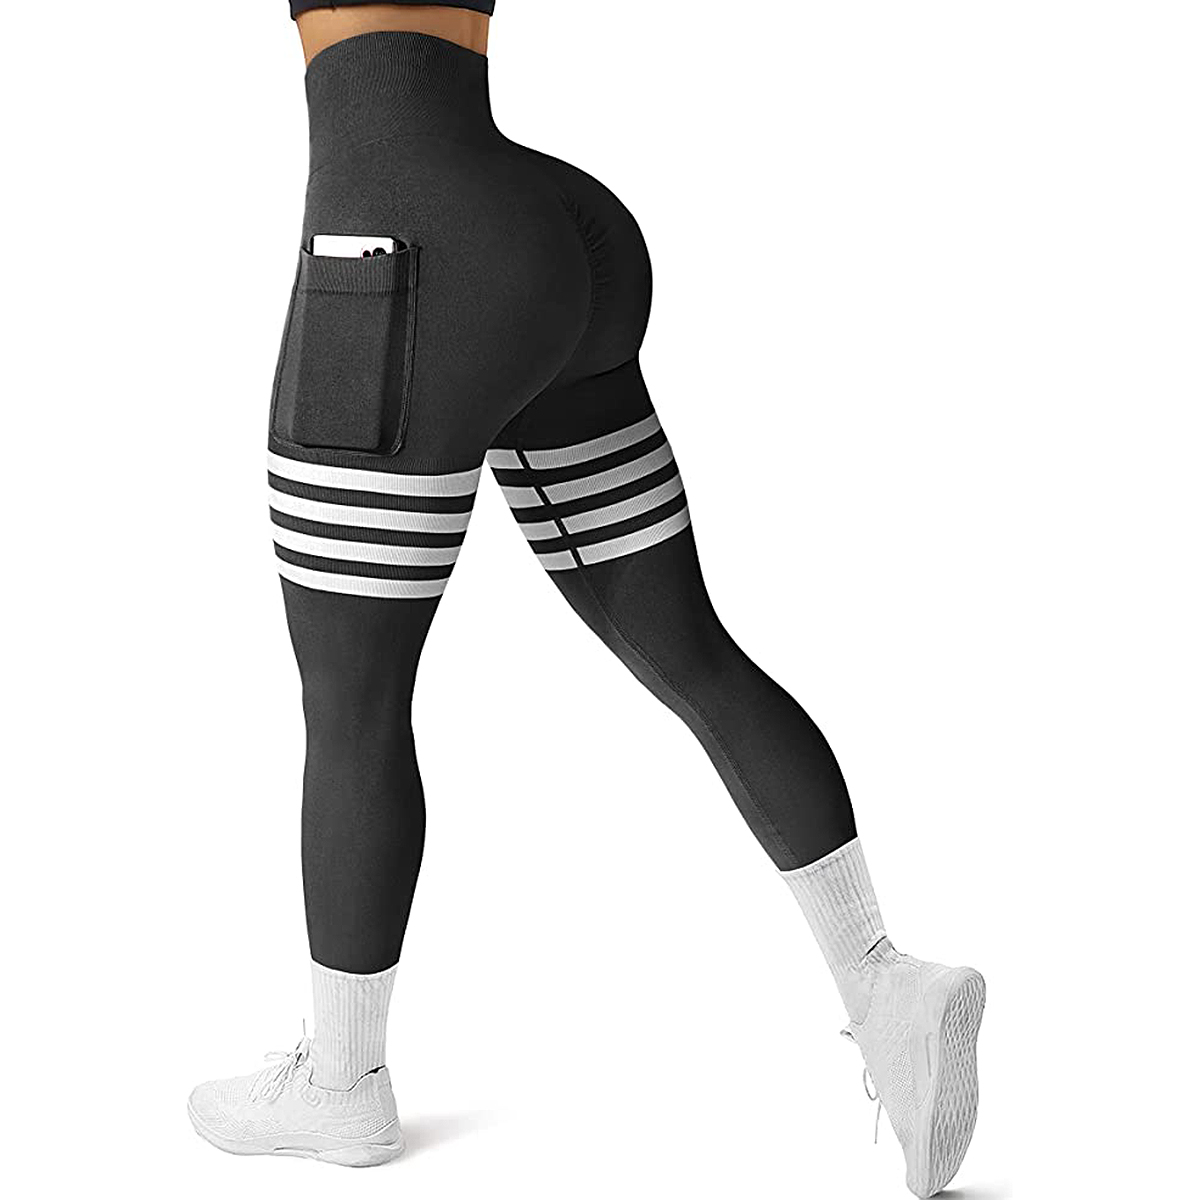 Update more than 160 best anti cellulite pants - in.eteachers